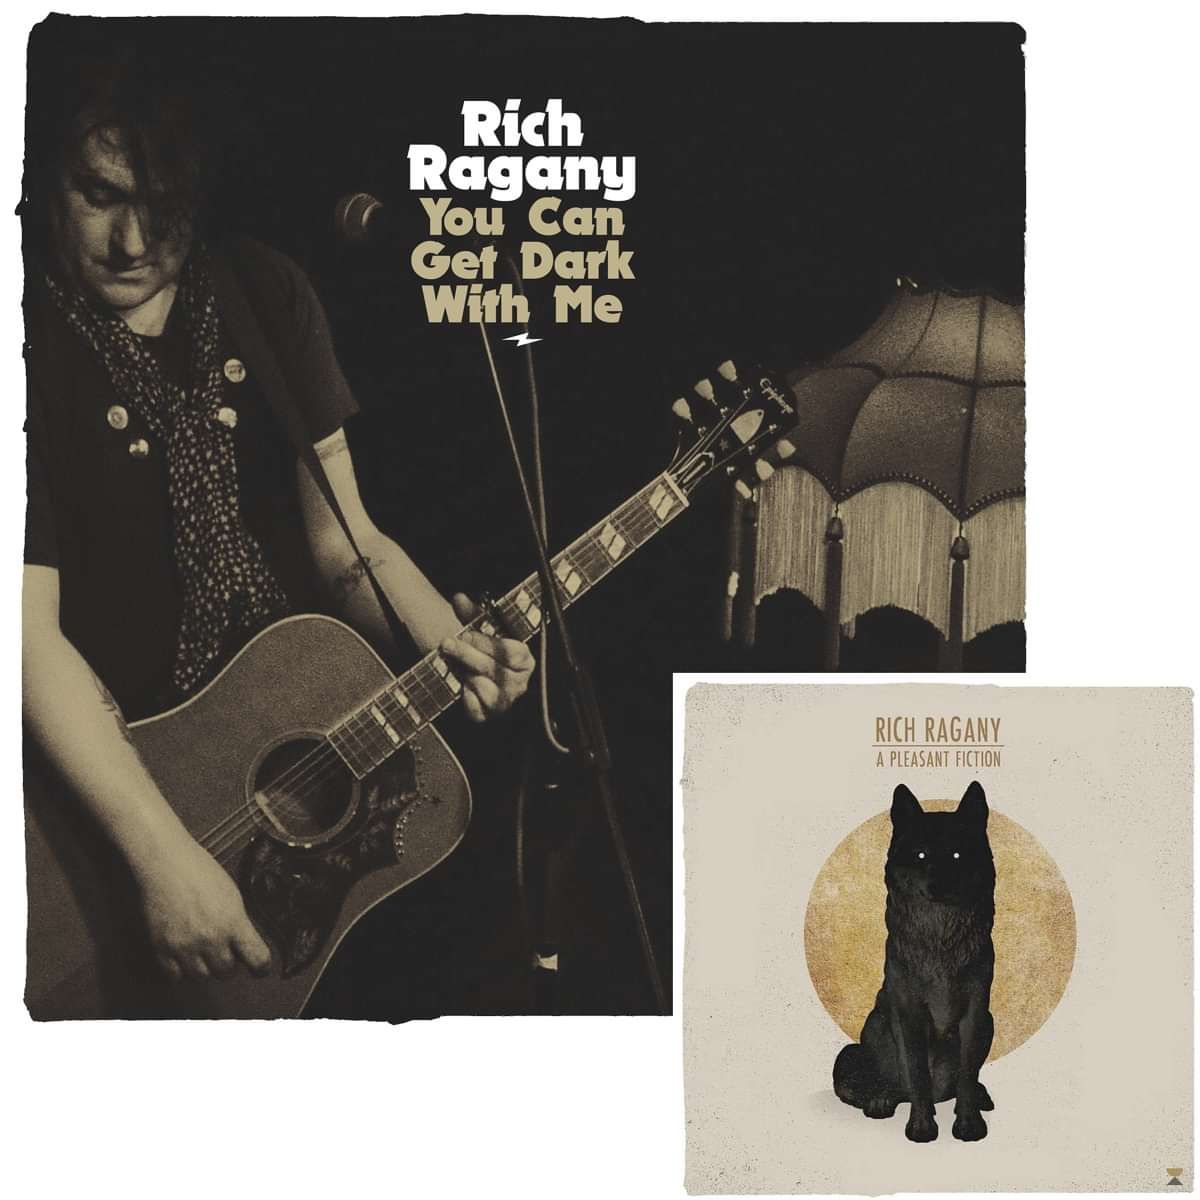 Rich Ragany - You Can Get Dark With Me - Digital album + single - Barrel And Squidger Records